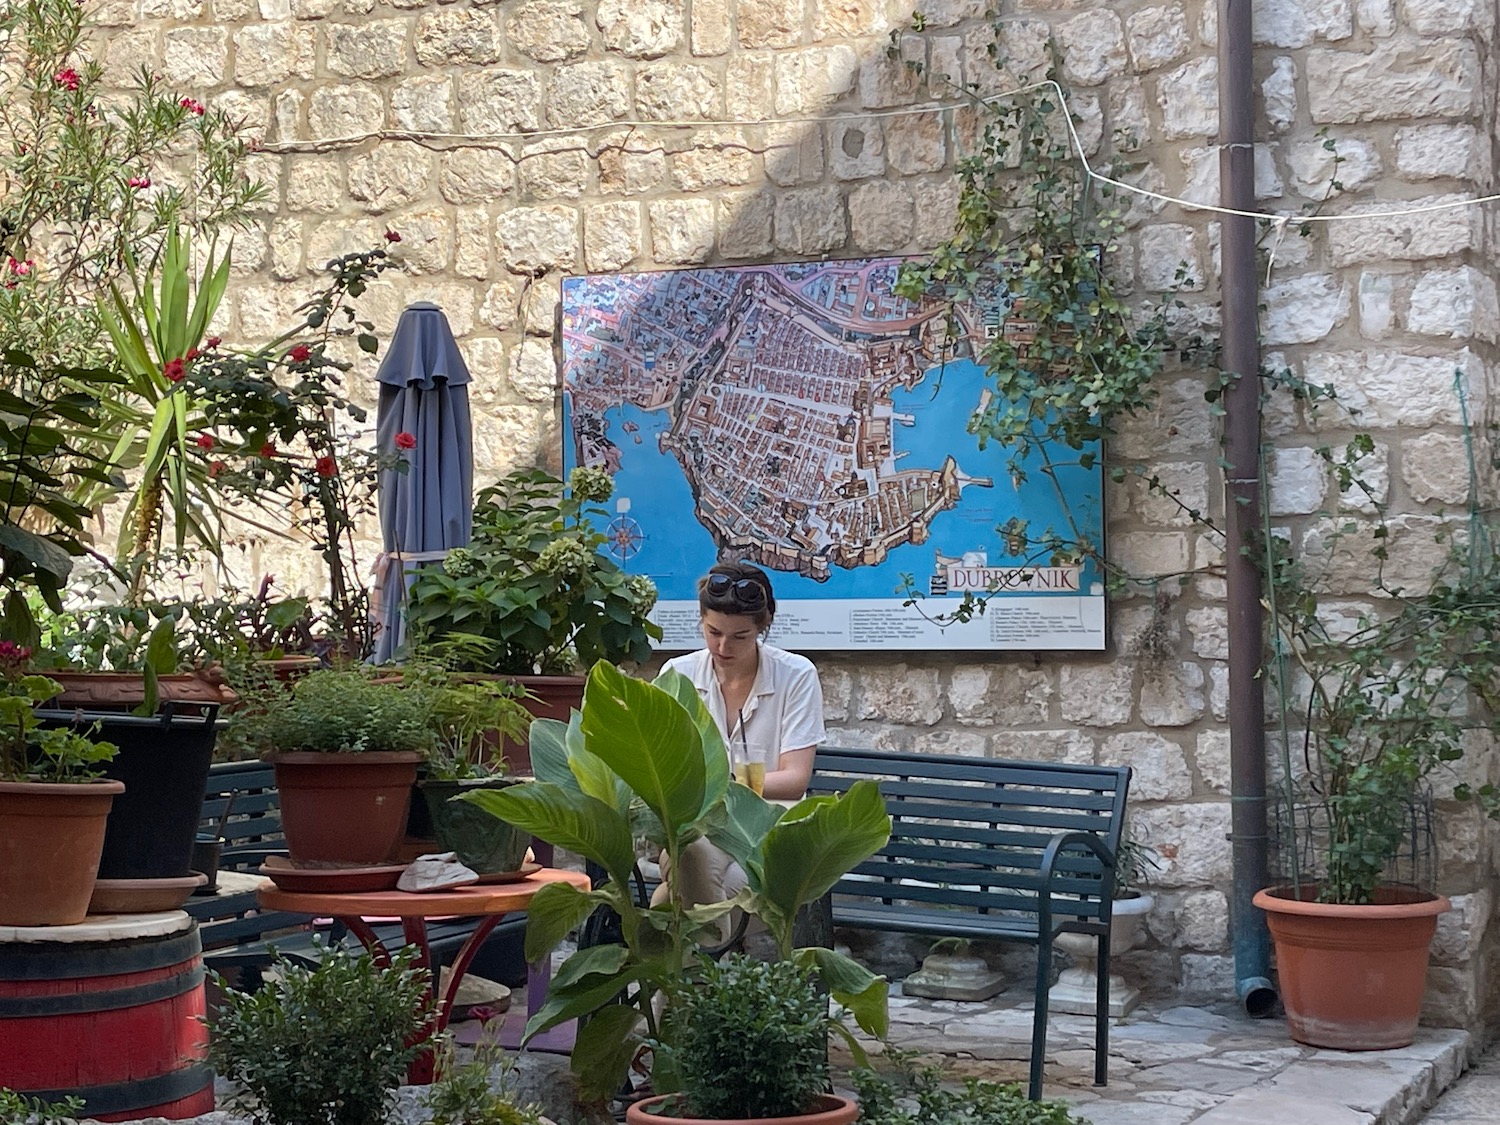 a woman sitting in a courtyard with plants and a map on the wall